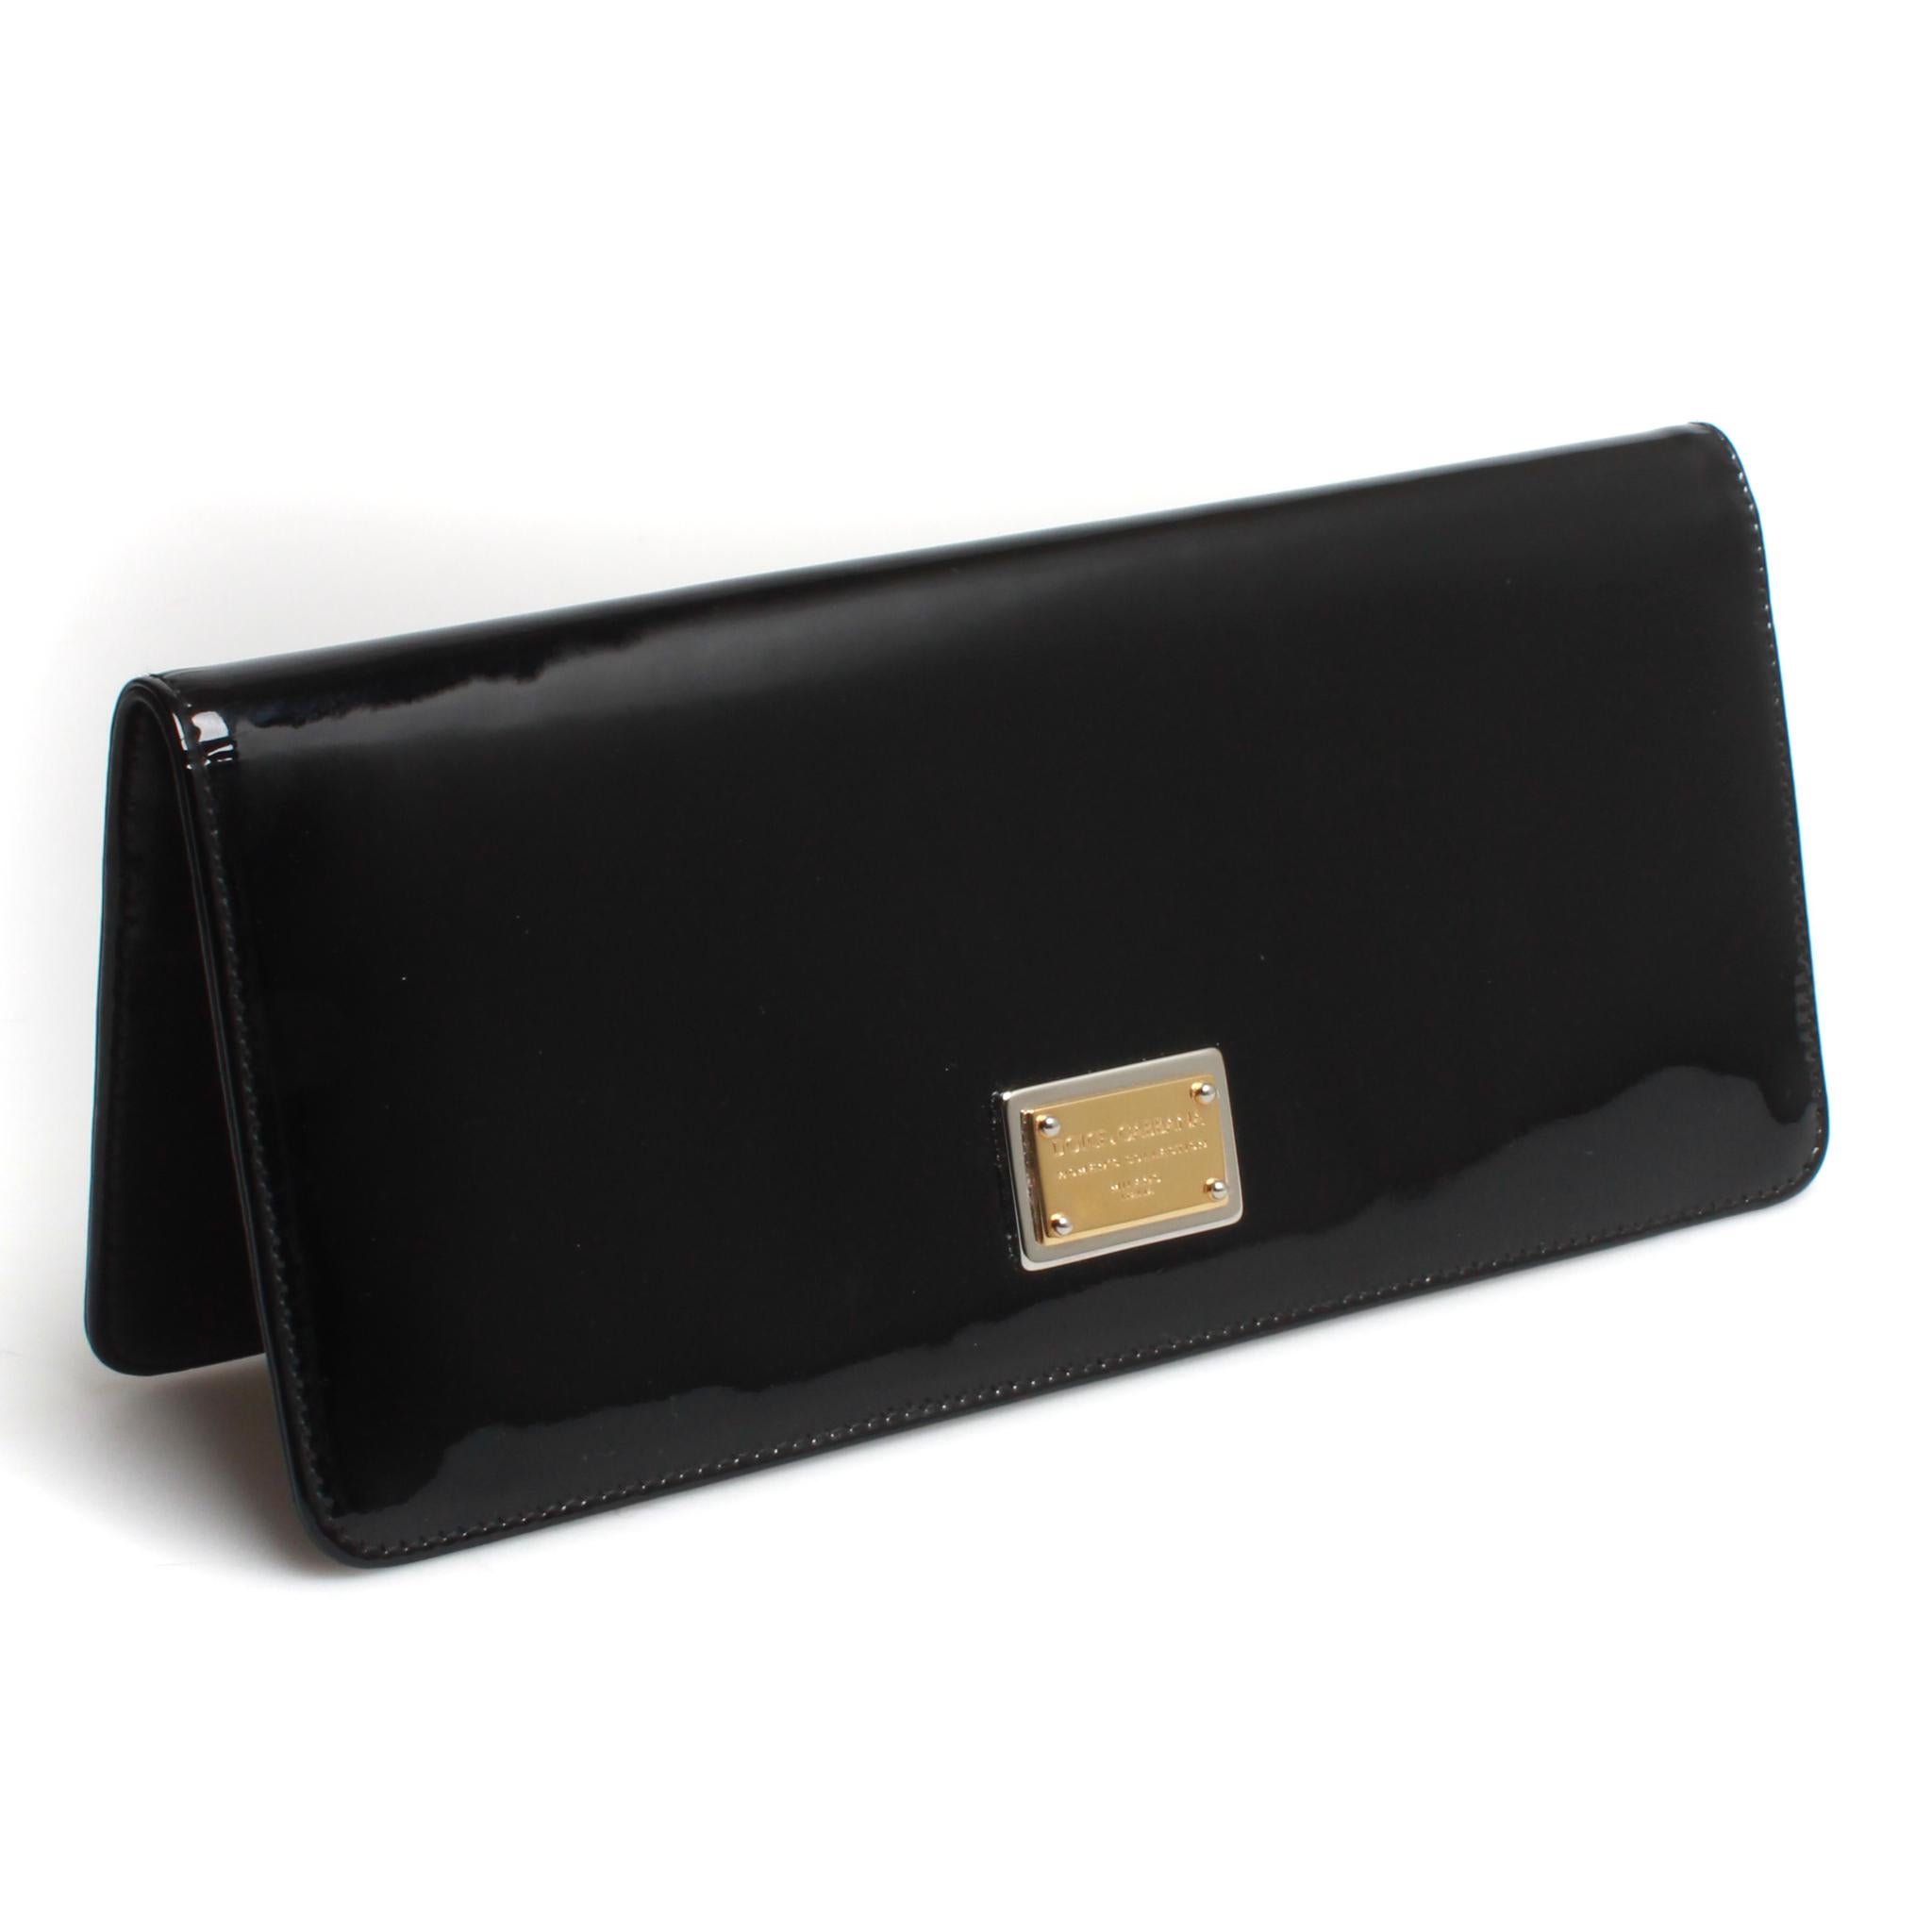 Black patent Dolce & Gabbana 'Miss Zoe' clutch with snap closure and beautifully soft leather interior with two zip compartments.
Comes with box and dust bag. No authenticity card.

